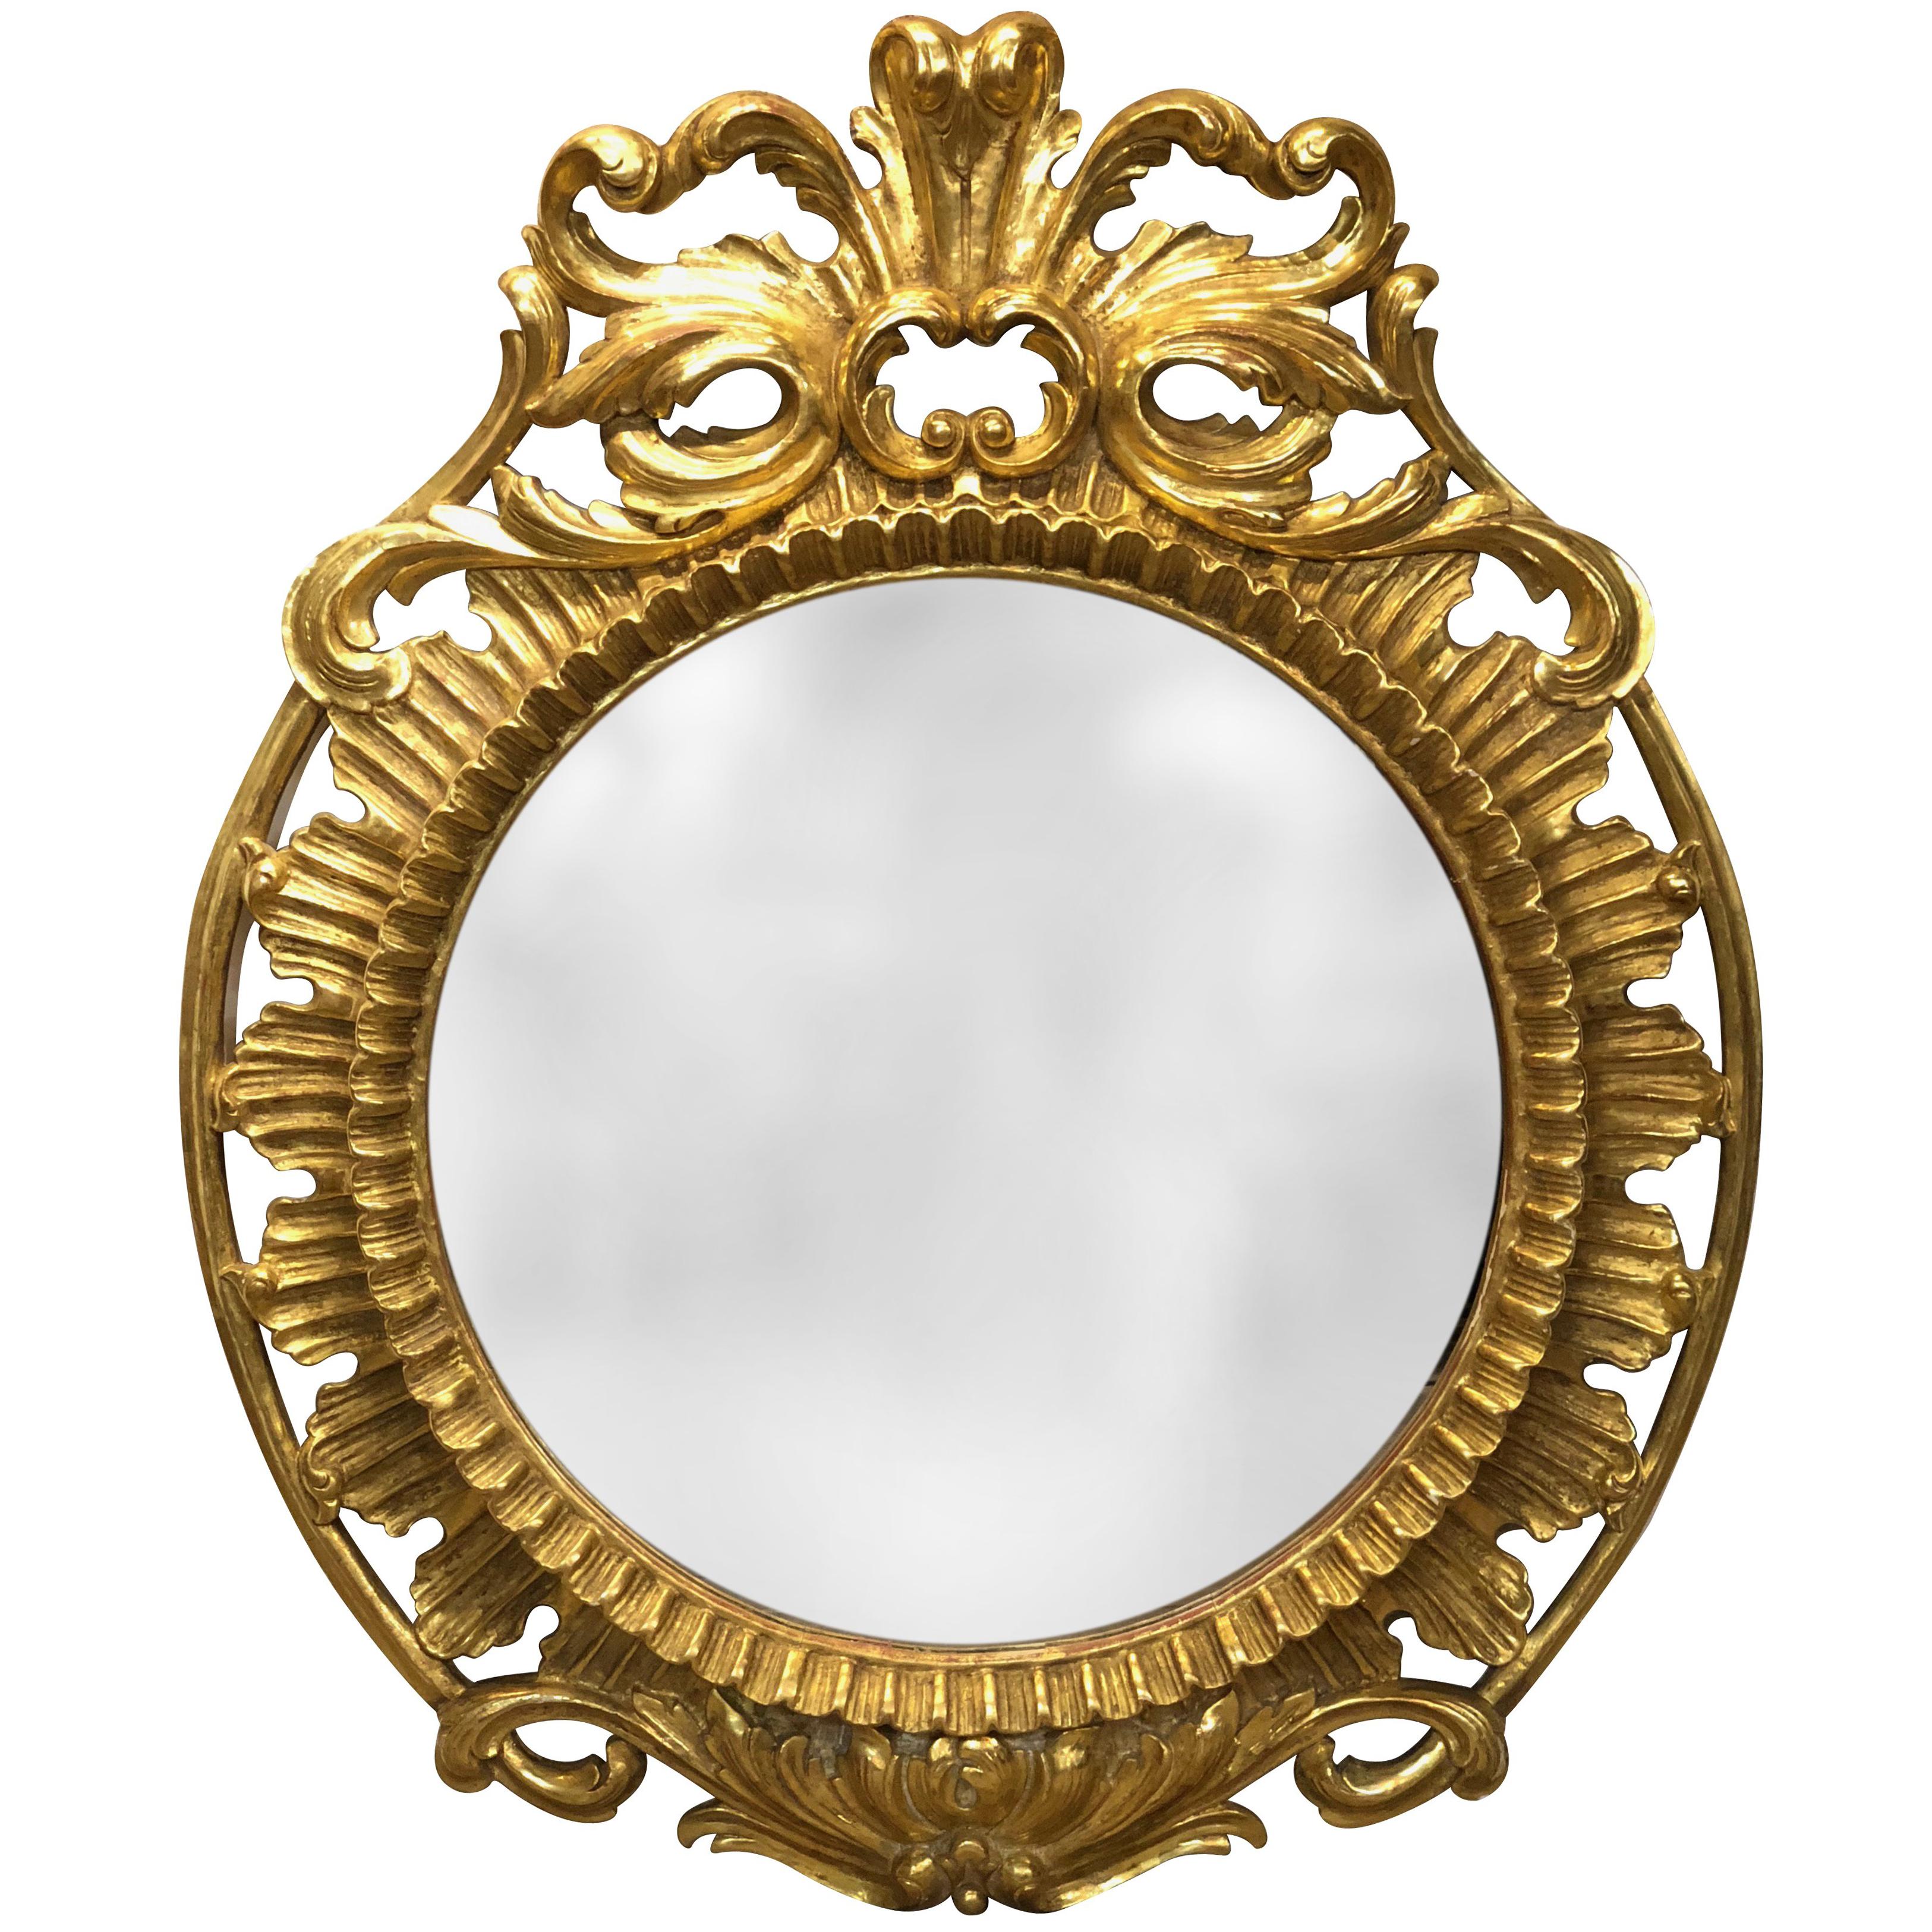 19th Century Italian Carved and Pierced Giltwood Circular Mirror with Cartouche